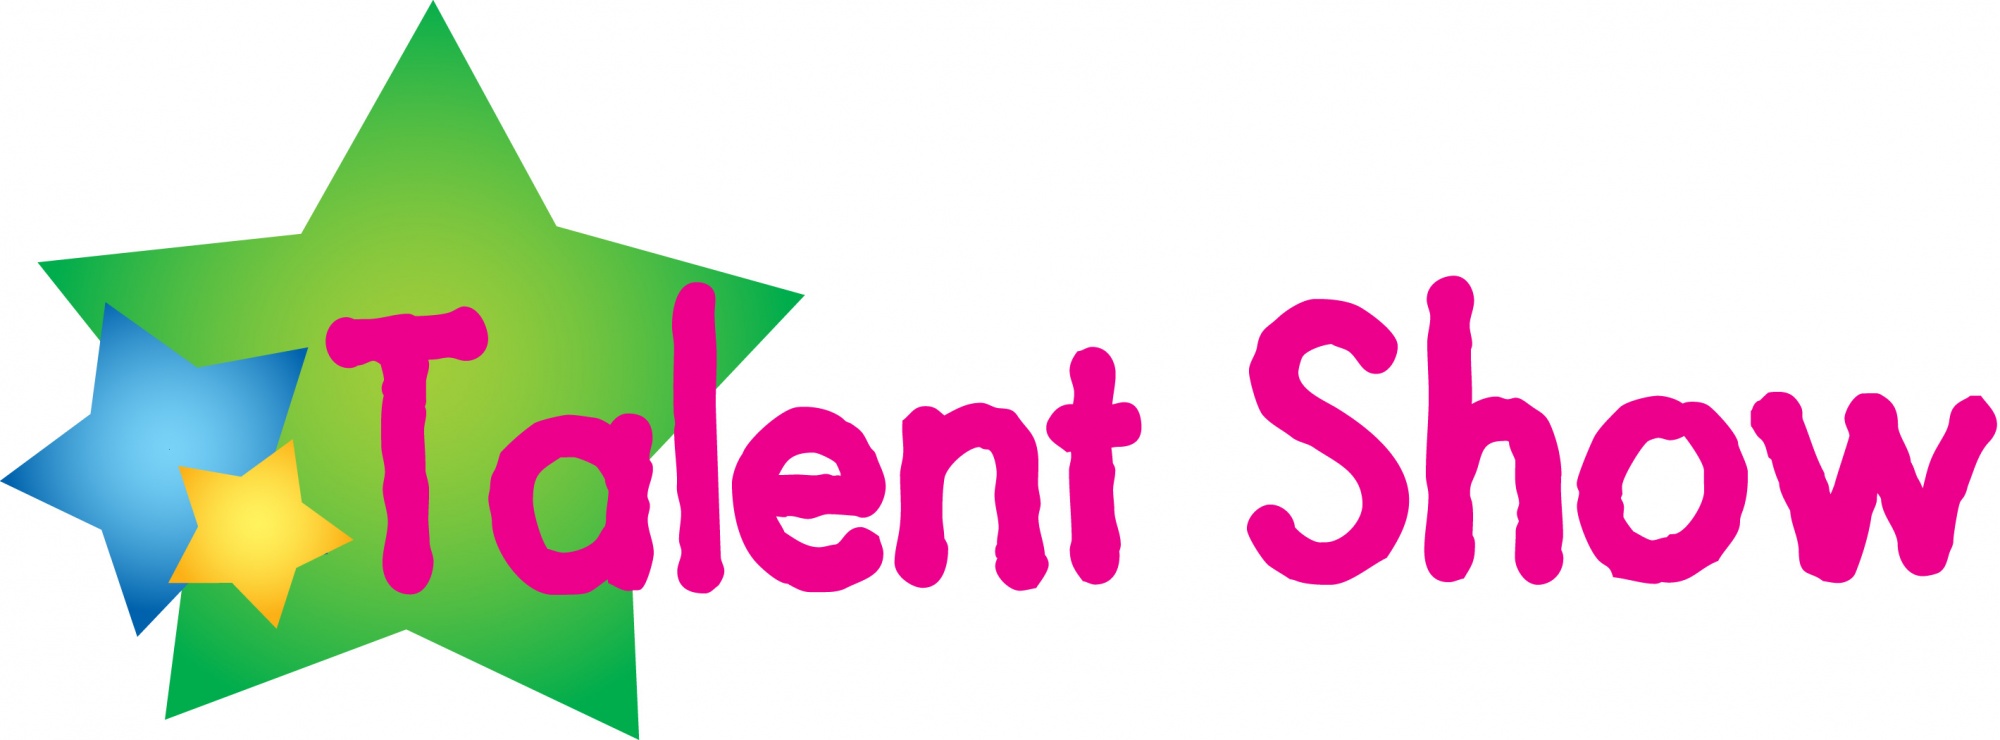 64 Images Of Talent Show Poster   You Can Use These Free Cliparts For    